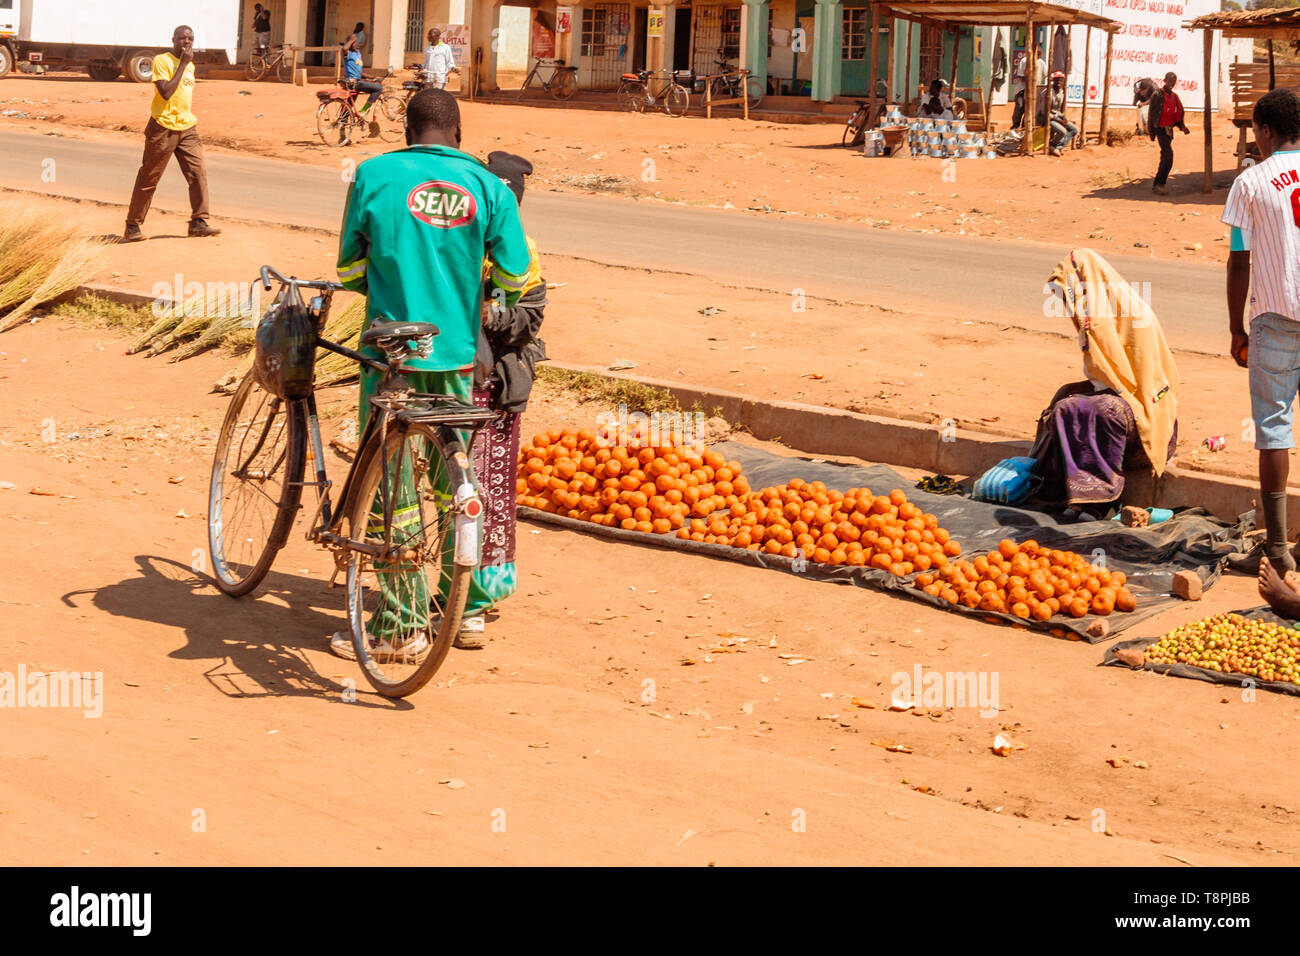 Malawian women selling tomatoes by the side of a road in Dedza Malawi Stock Photo